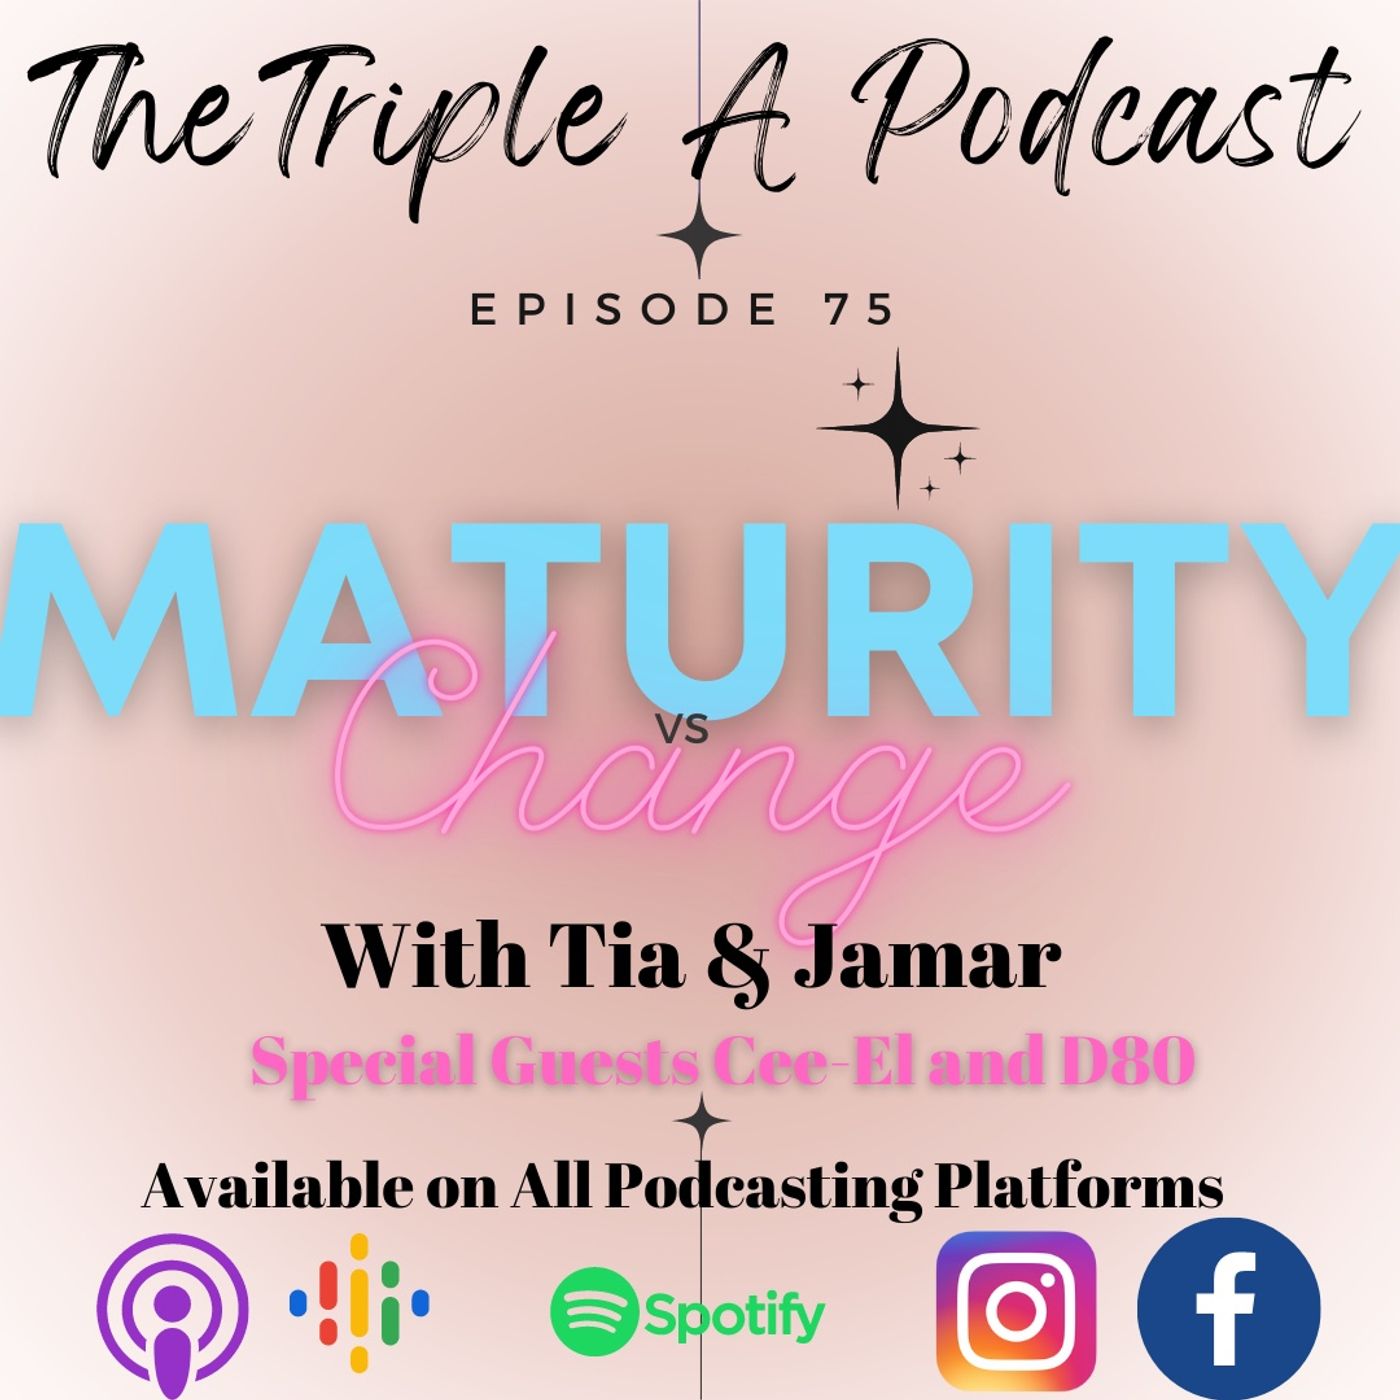 TAP EP 75 "Maturity VS Change" with Cee- El and D80